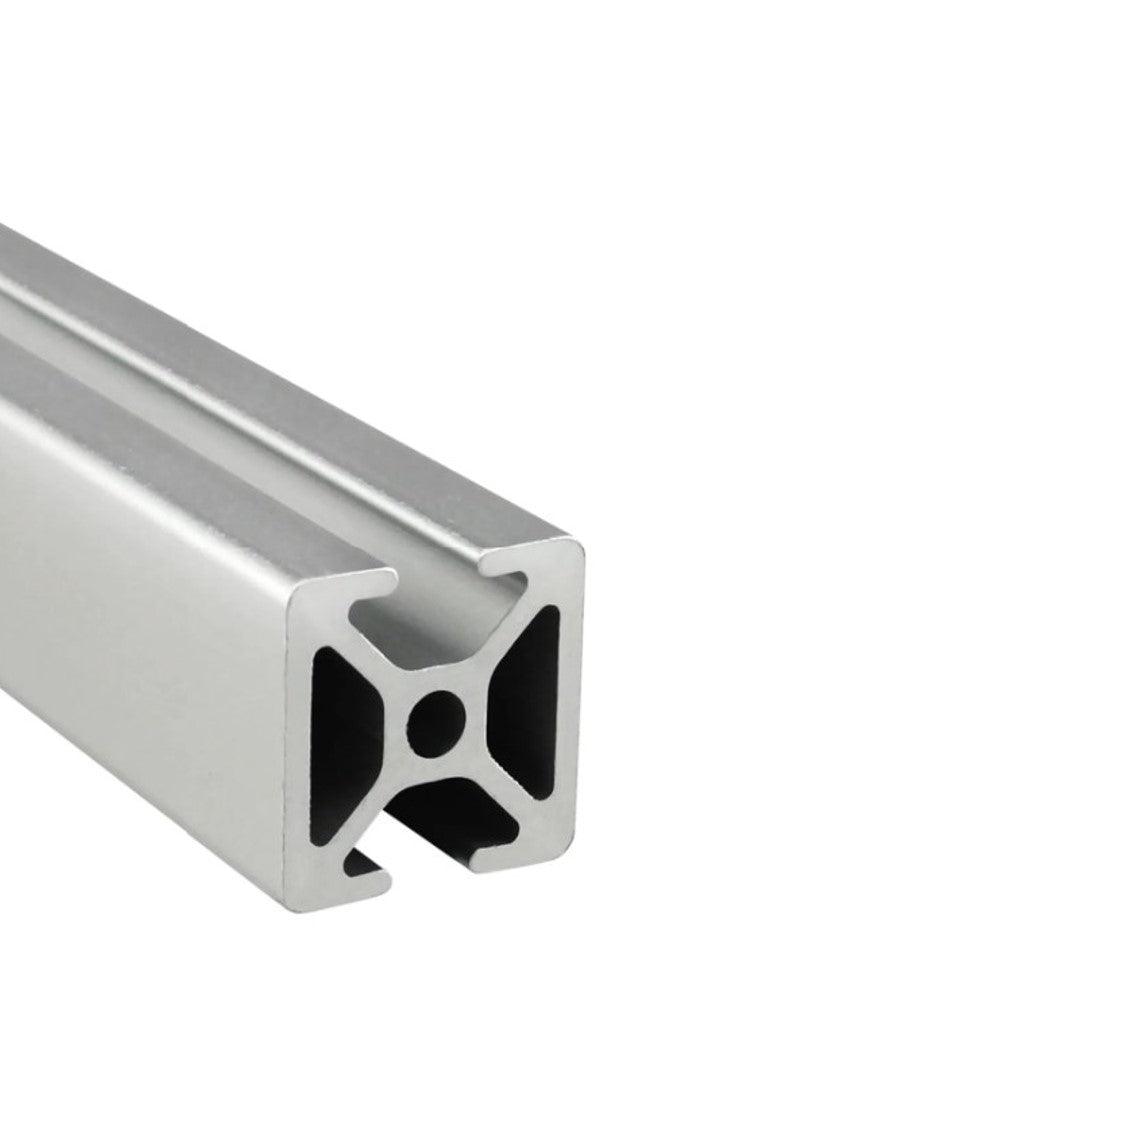 1" x 1" Opposite Smooth Bi-Slotted Aluminum Extrusion - 2ft Bar - Forces Inc